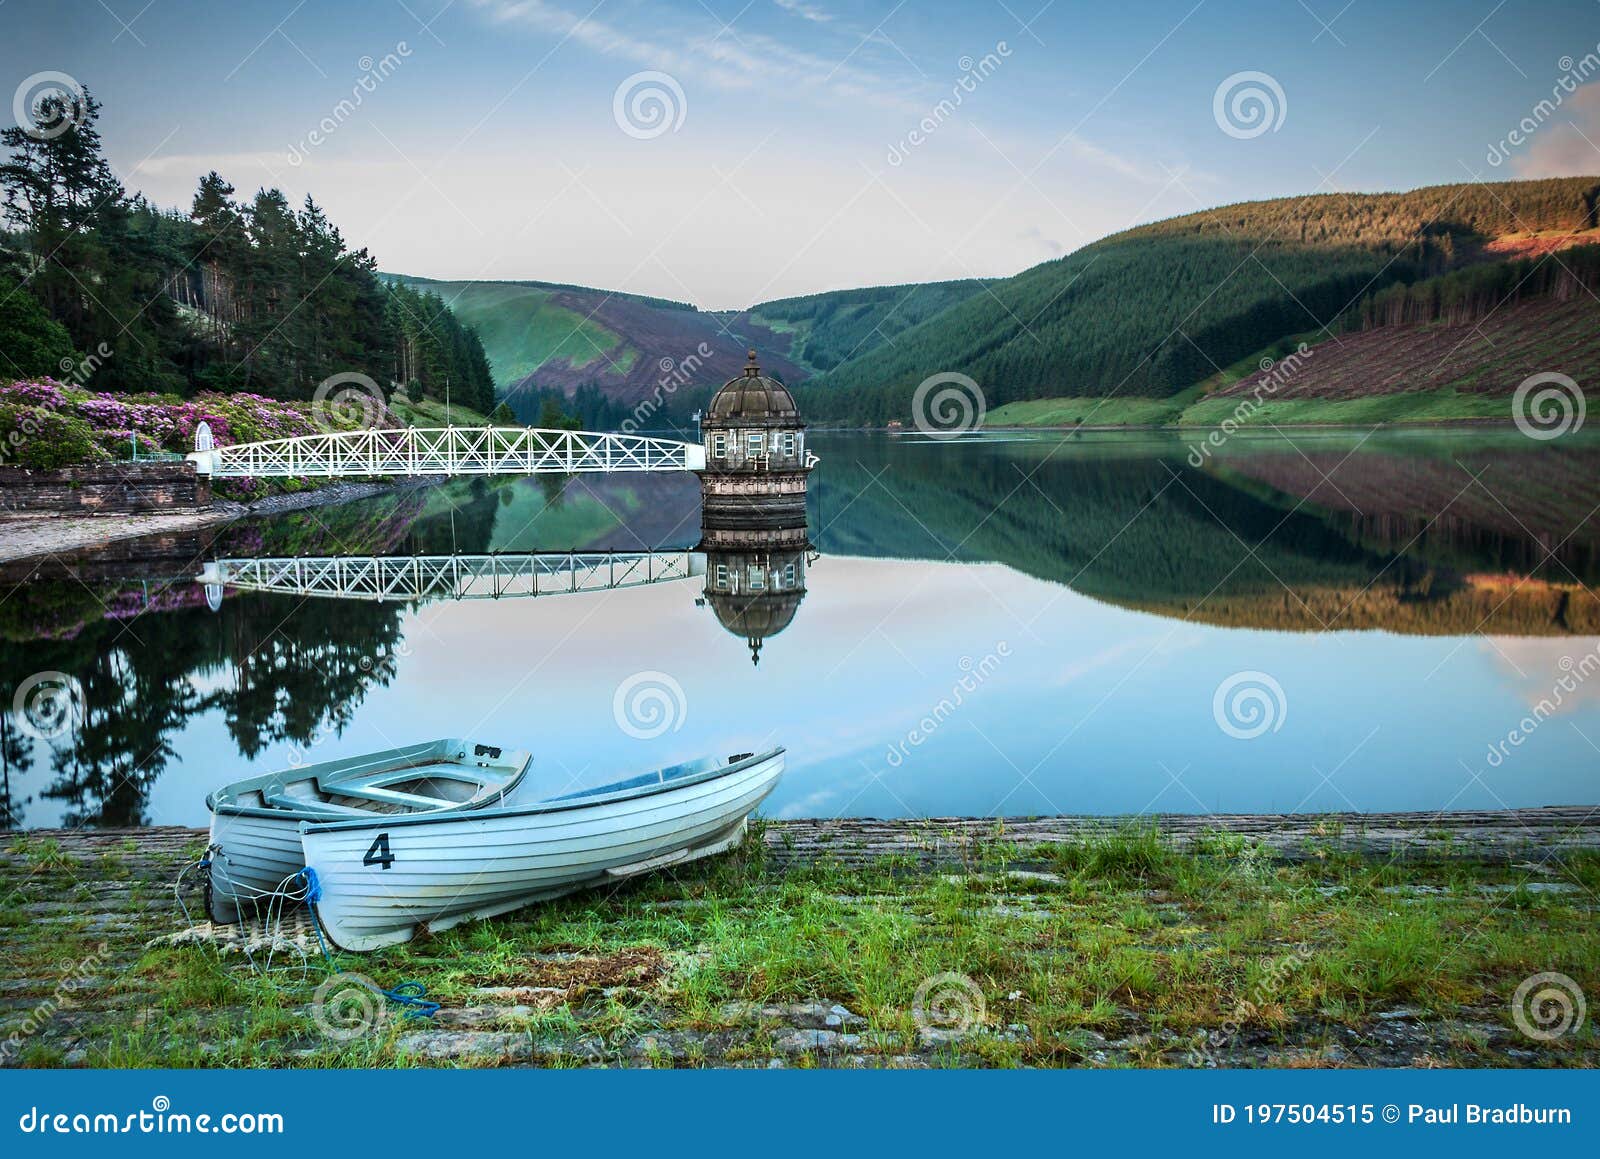 the calm waters of talla reservoir.